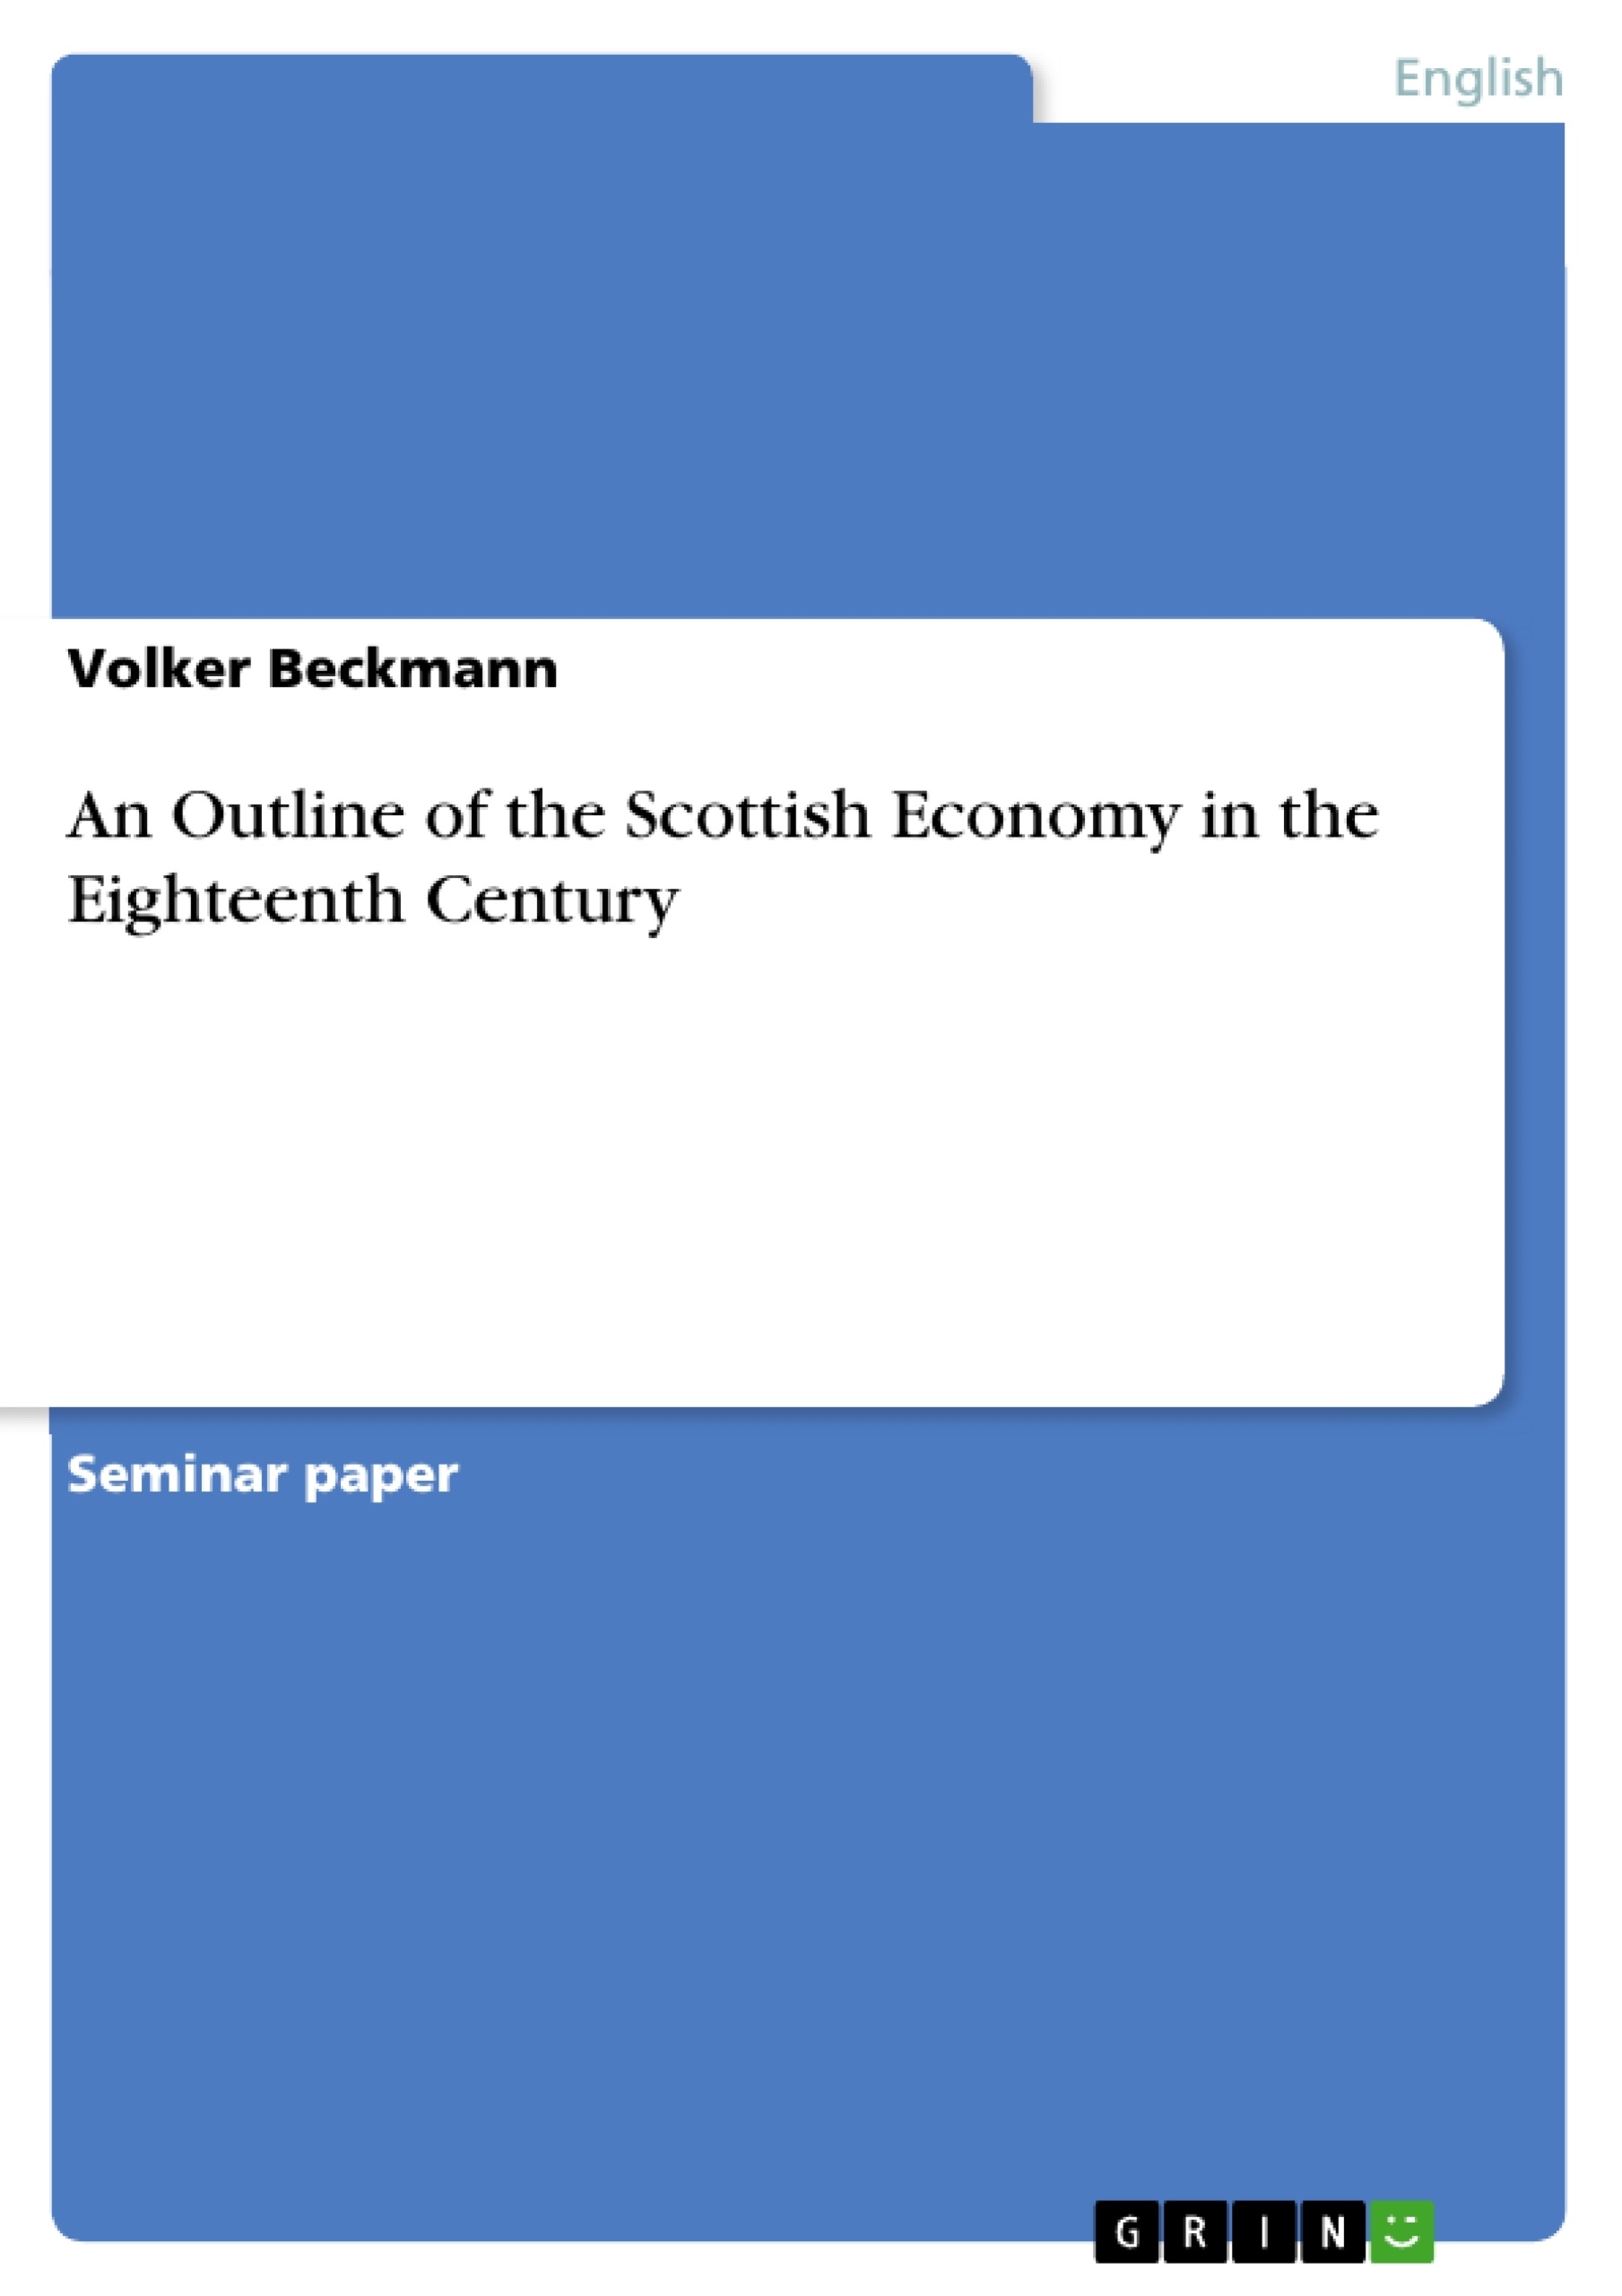 Titel: An Outline of the Scottish Economy in the Eighteenth Century